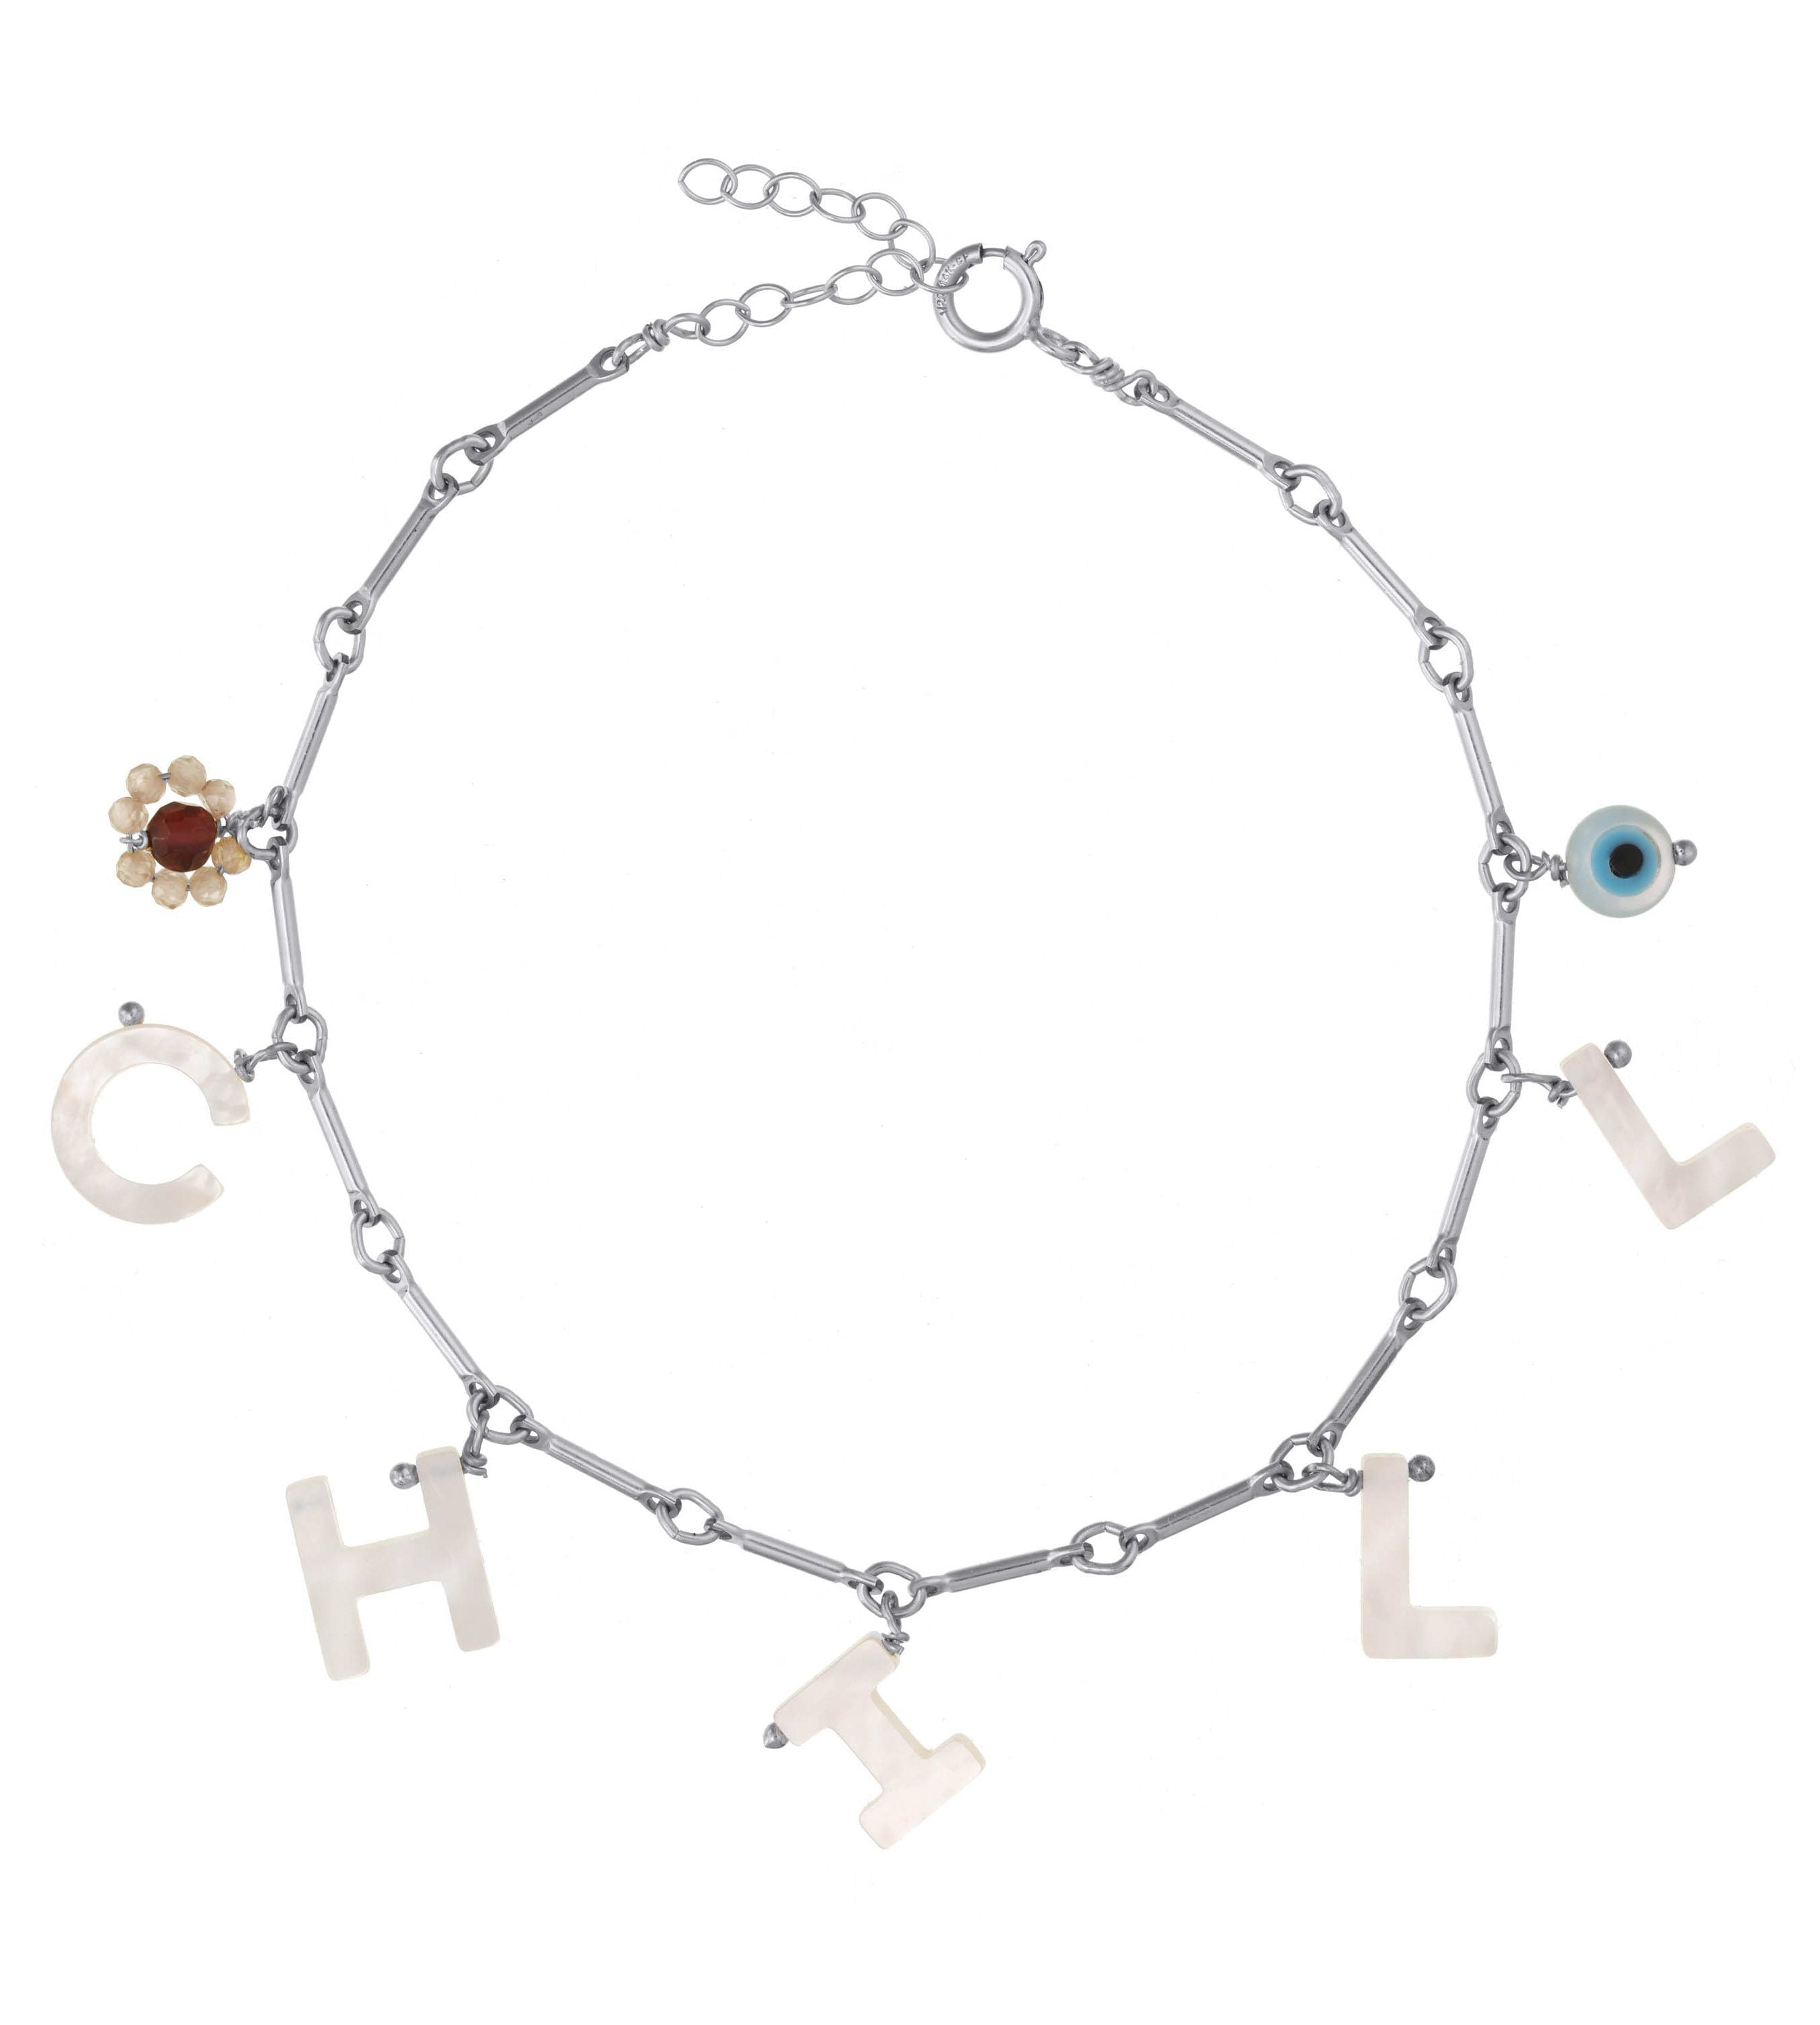 Shore Bracelet by KOZAKH. A 6 to 7 inch adjustable length bracelet, crafted in Sterling Silver, featuring a hand carved Mother of Pearl Evil Eye, raw Ruby and Imperial Topaz gemstone flower, and a customizable word made out of hand carved Mother of Pearl letters. 